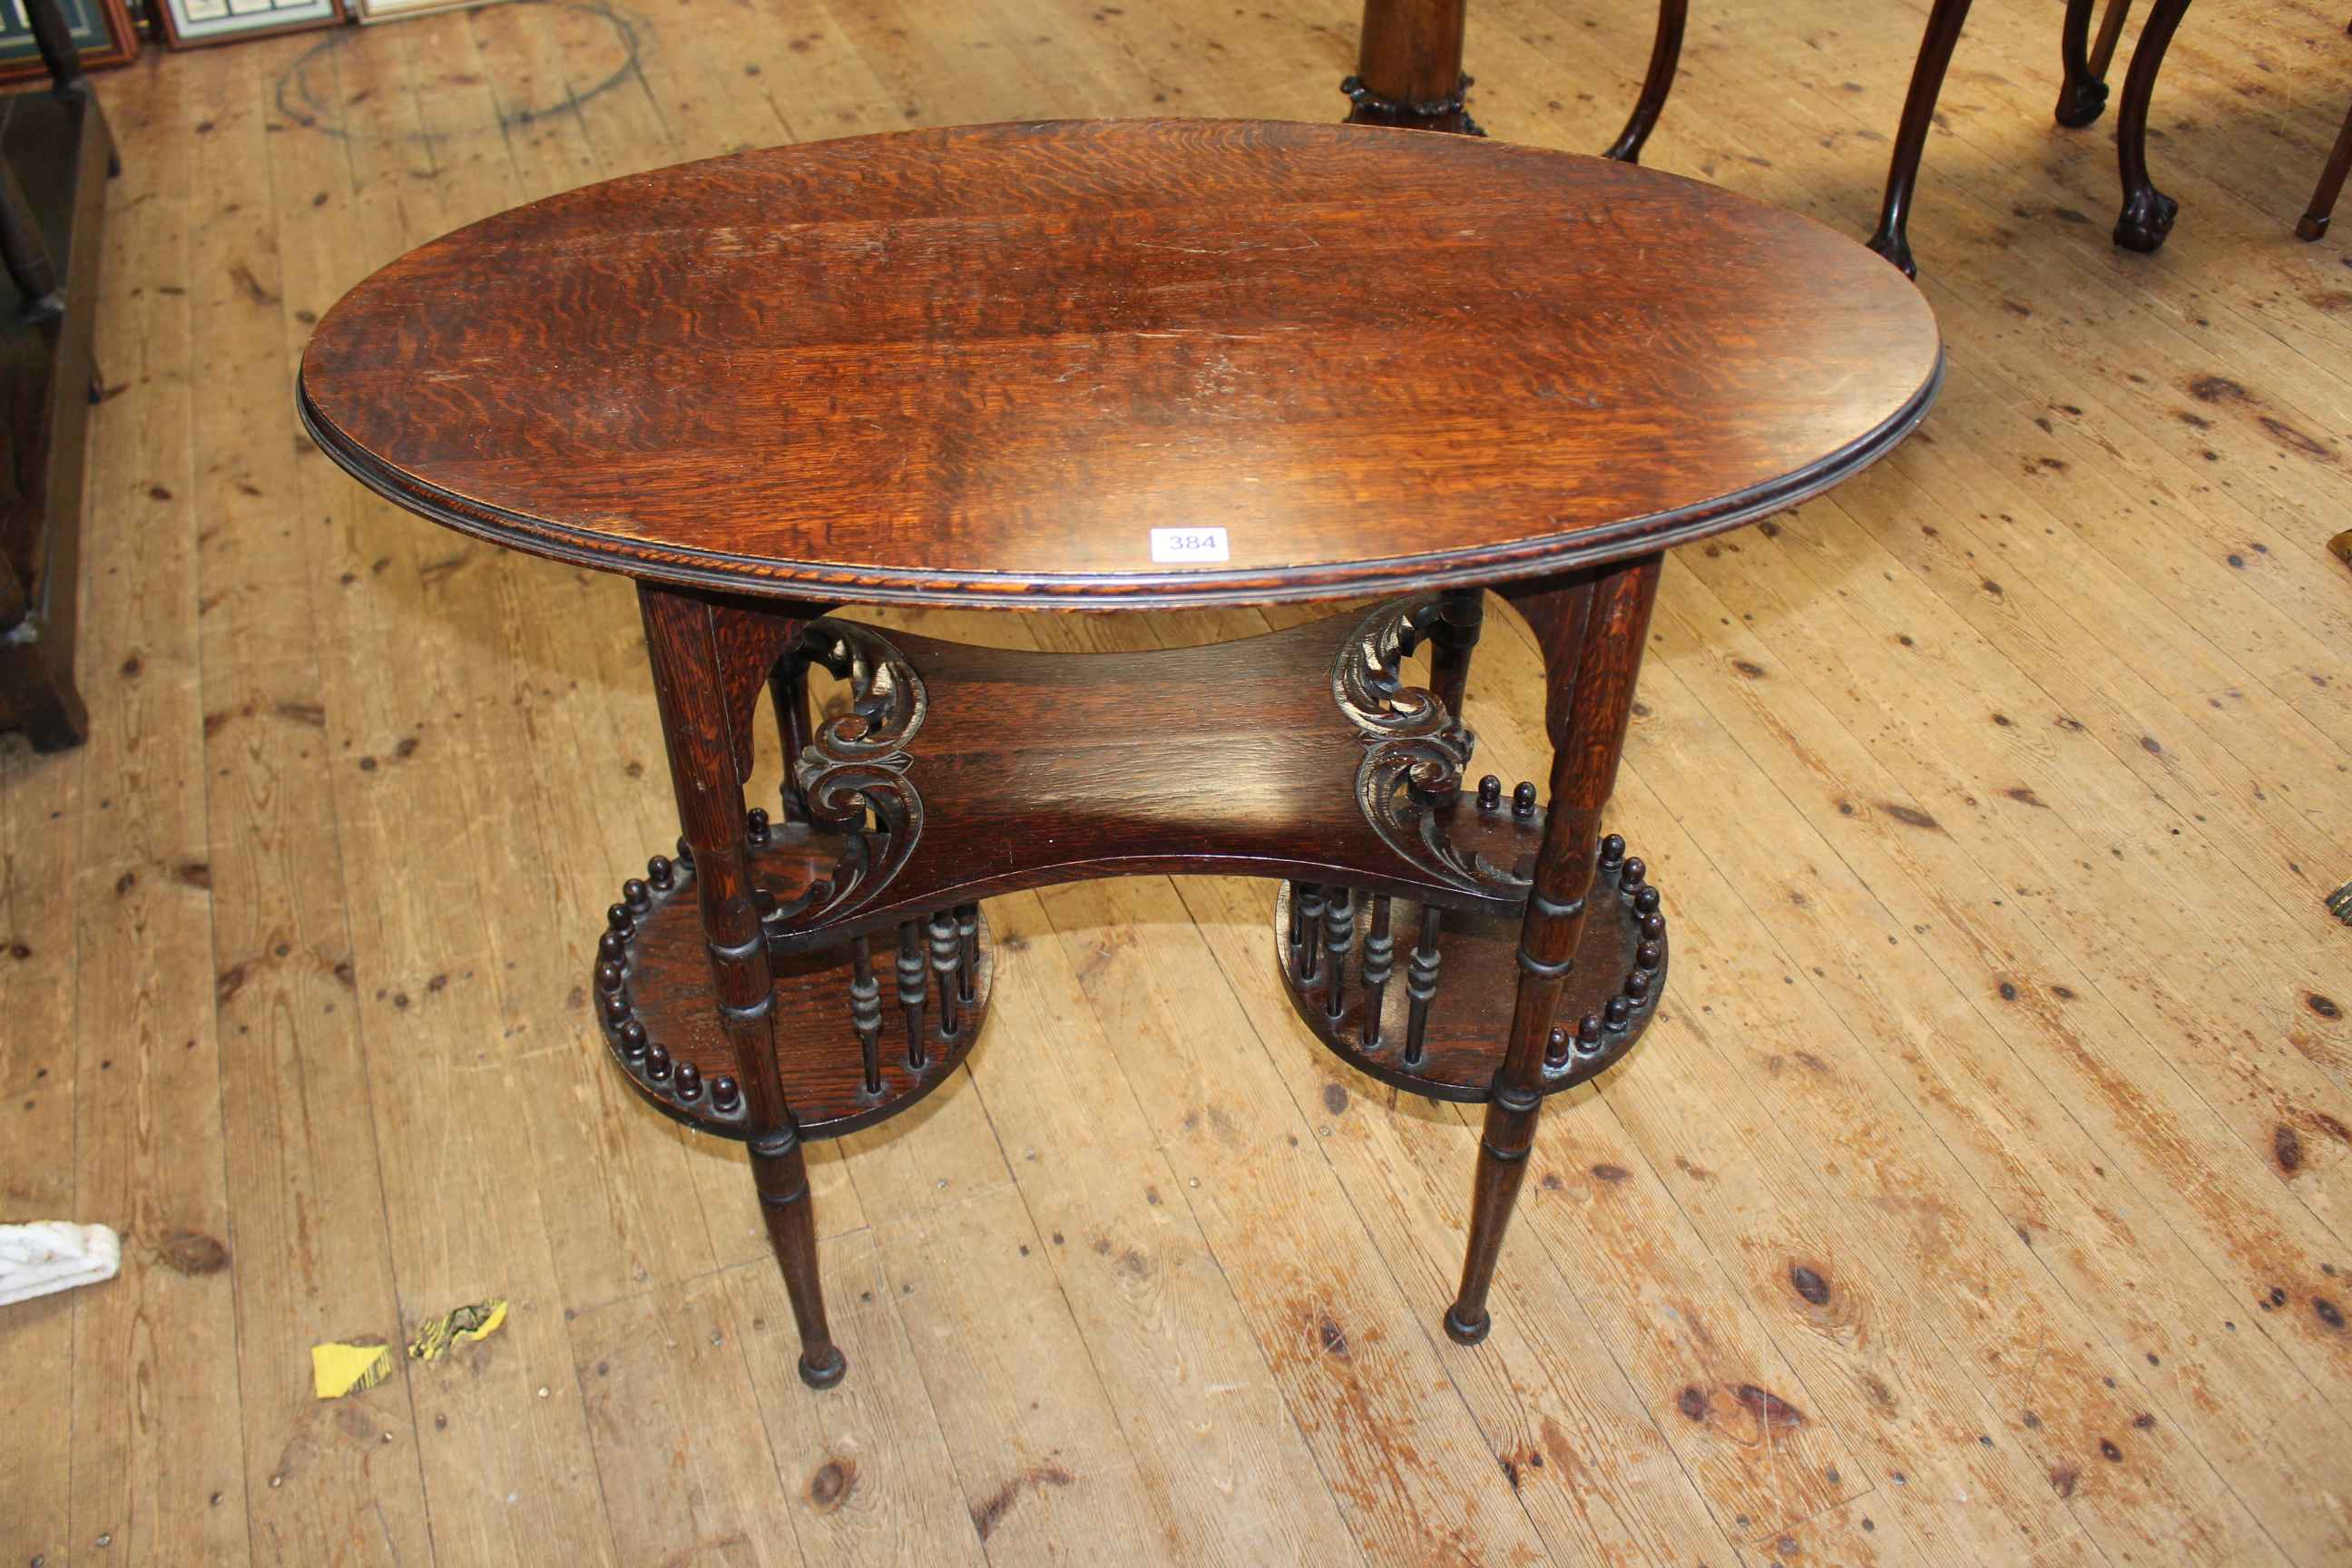 Unusual oval oak occasional table with two tiered undershelf, 74cm by 84cm by 46cm.